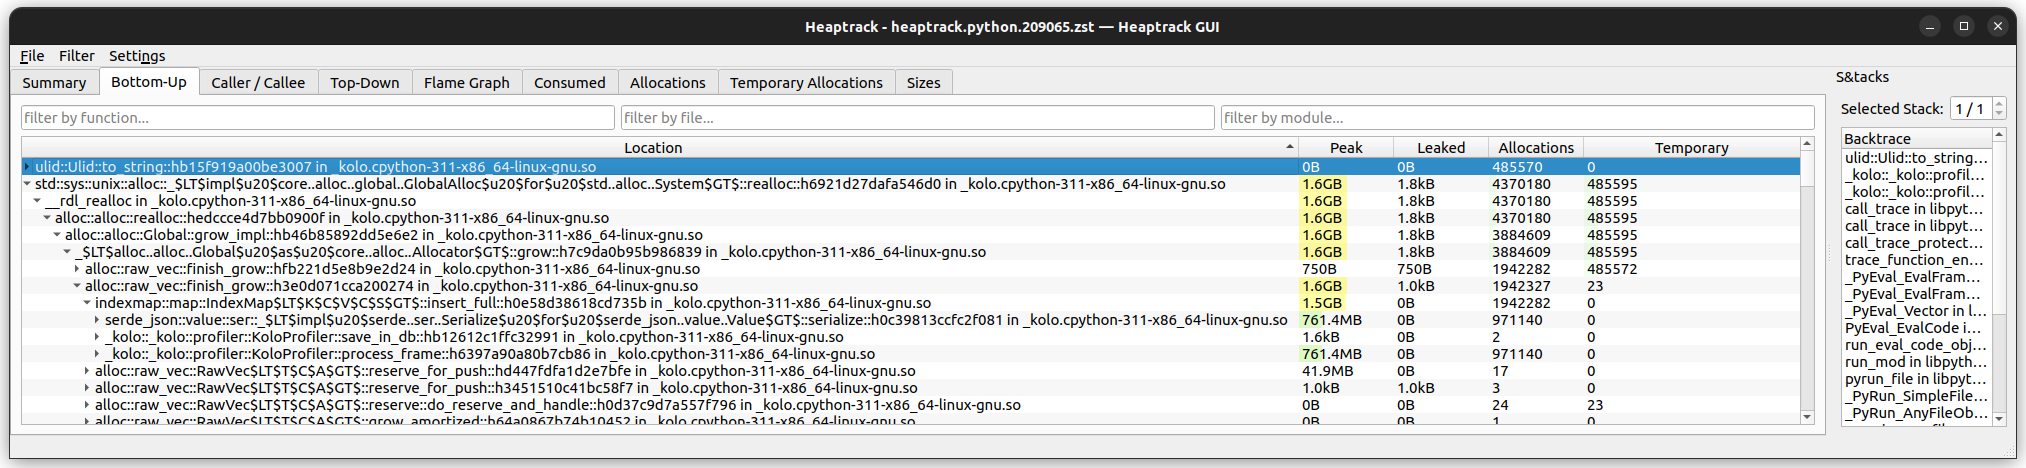 heaptrack's Bottom-Up view showing 1.6GB memory usage.